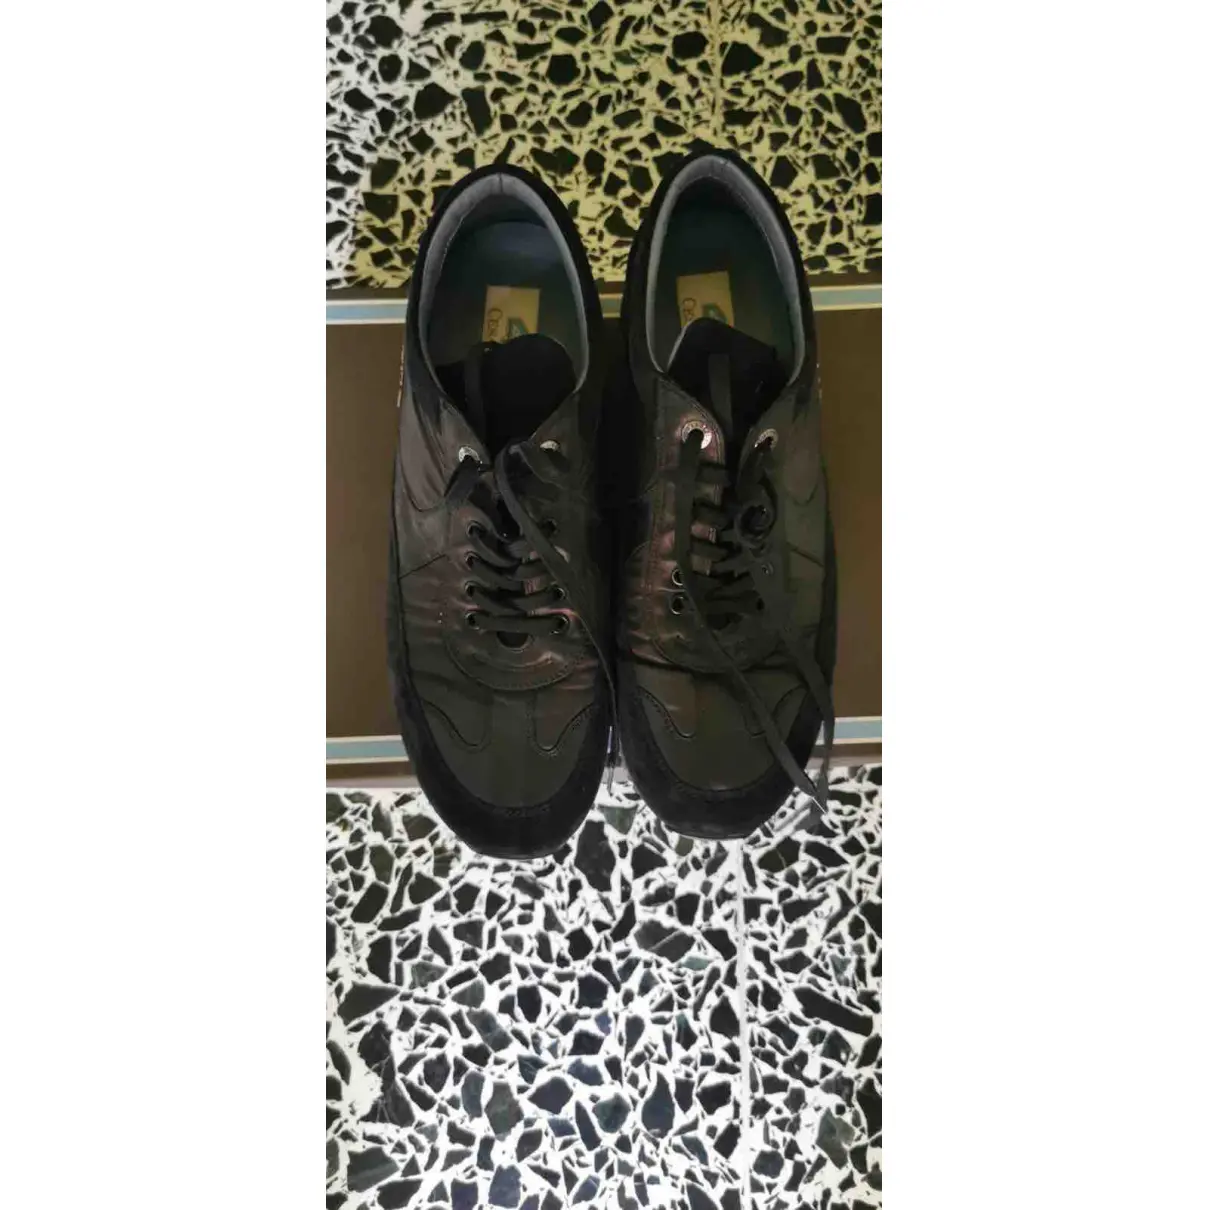 Buy Cesare Paciotti Leather low trainers online